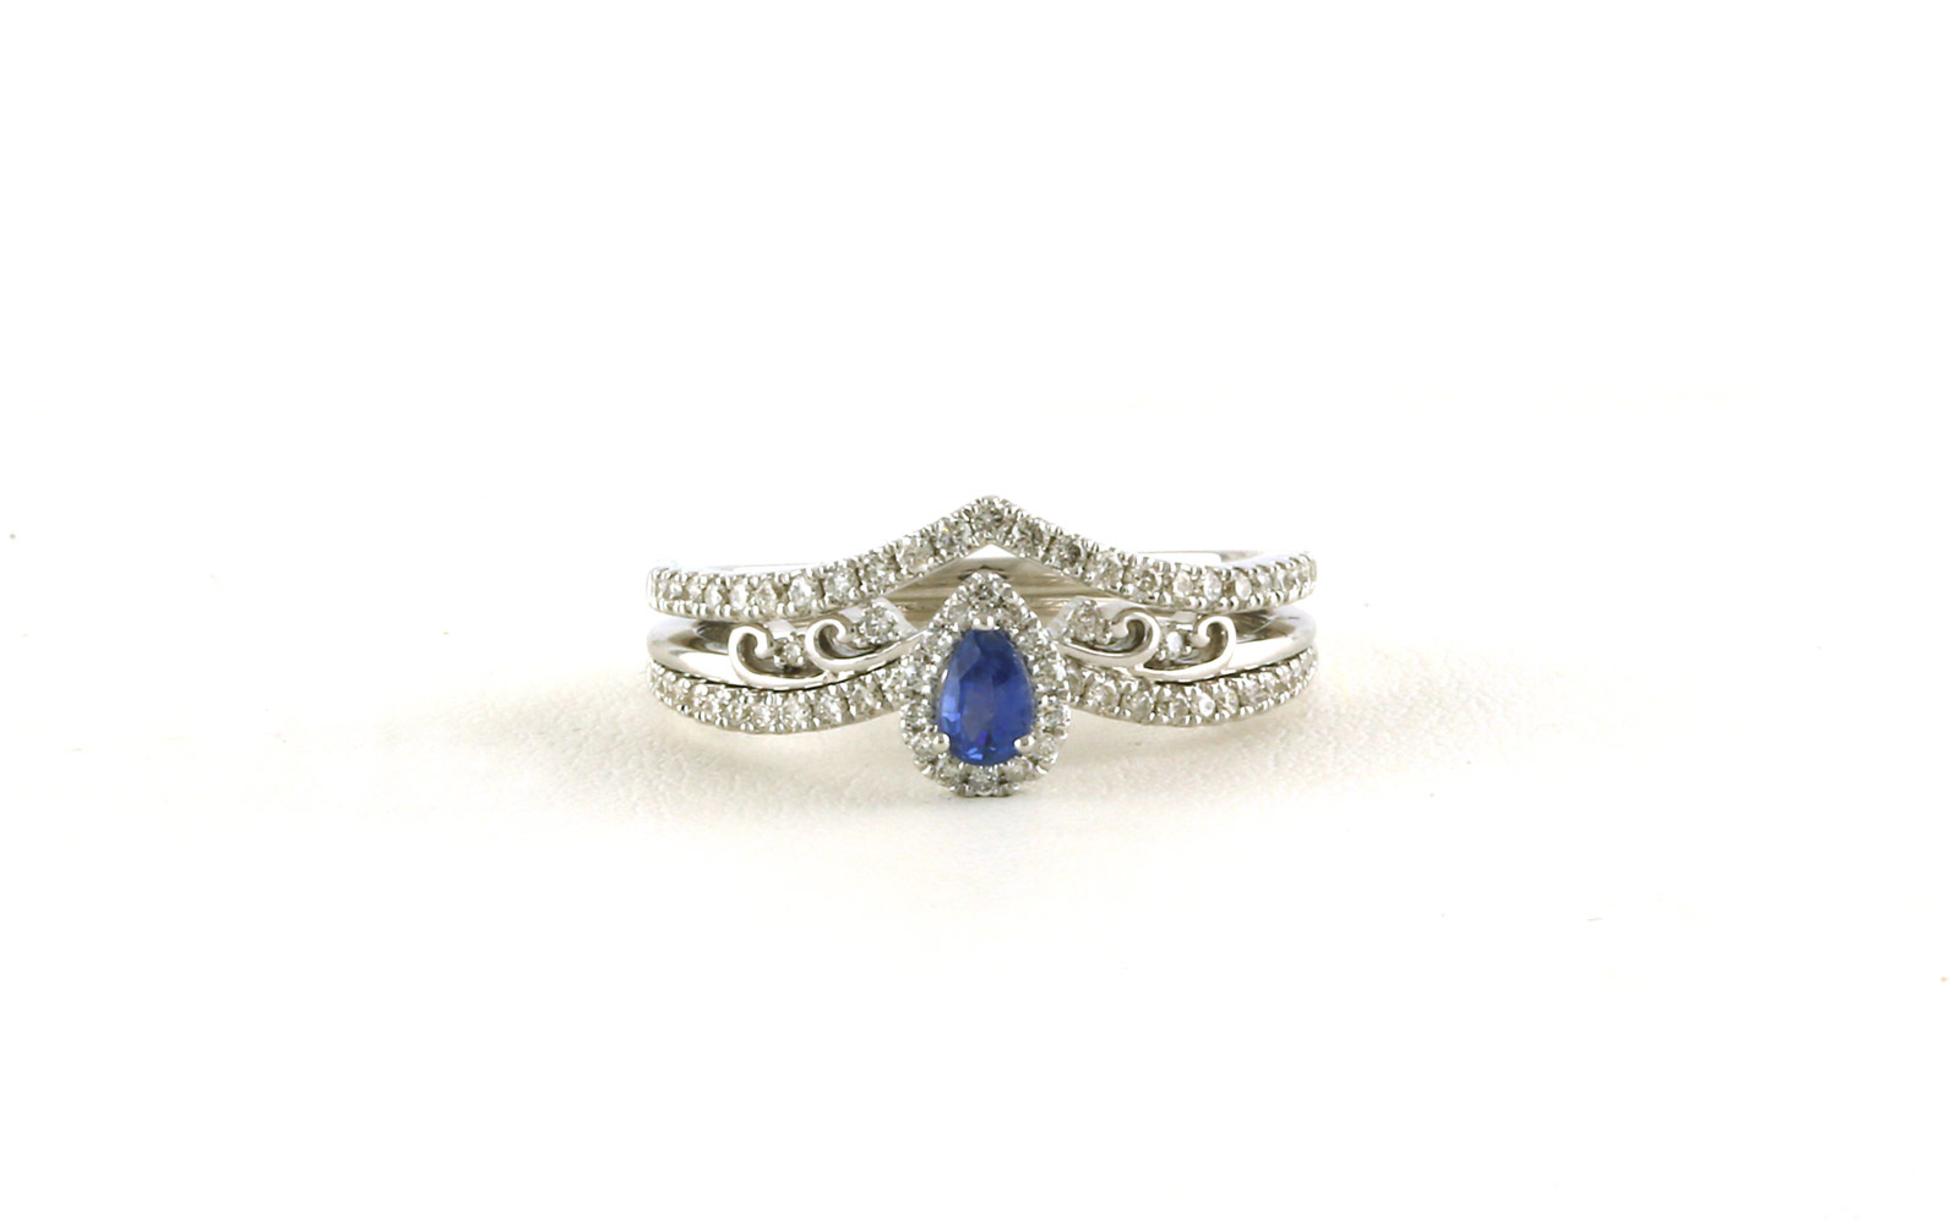 Halo-style Pear-cut Montana Yogo Sapphire and Diamonds Ring with Filigree Detail in White Gold (0.21cts)